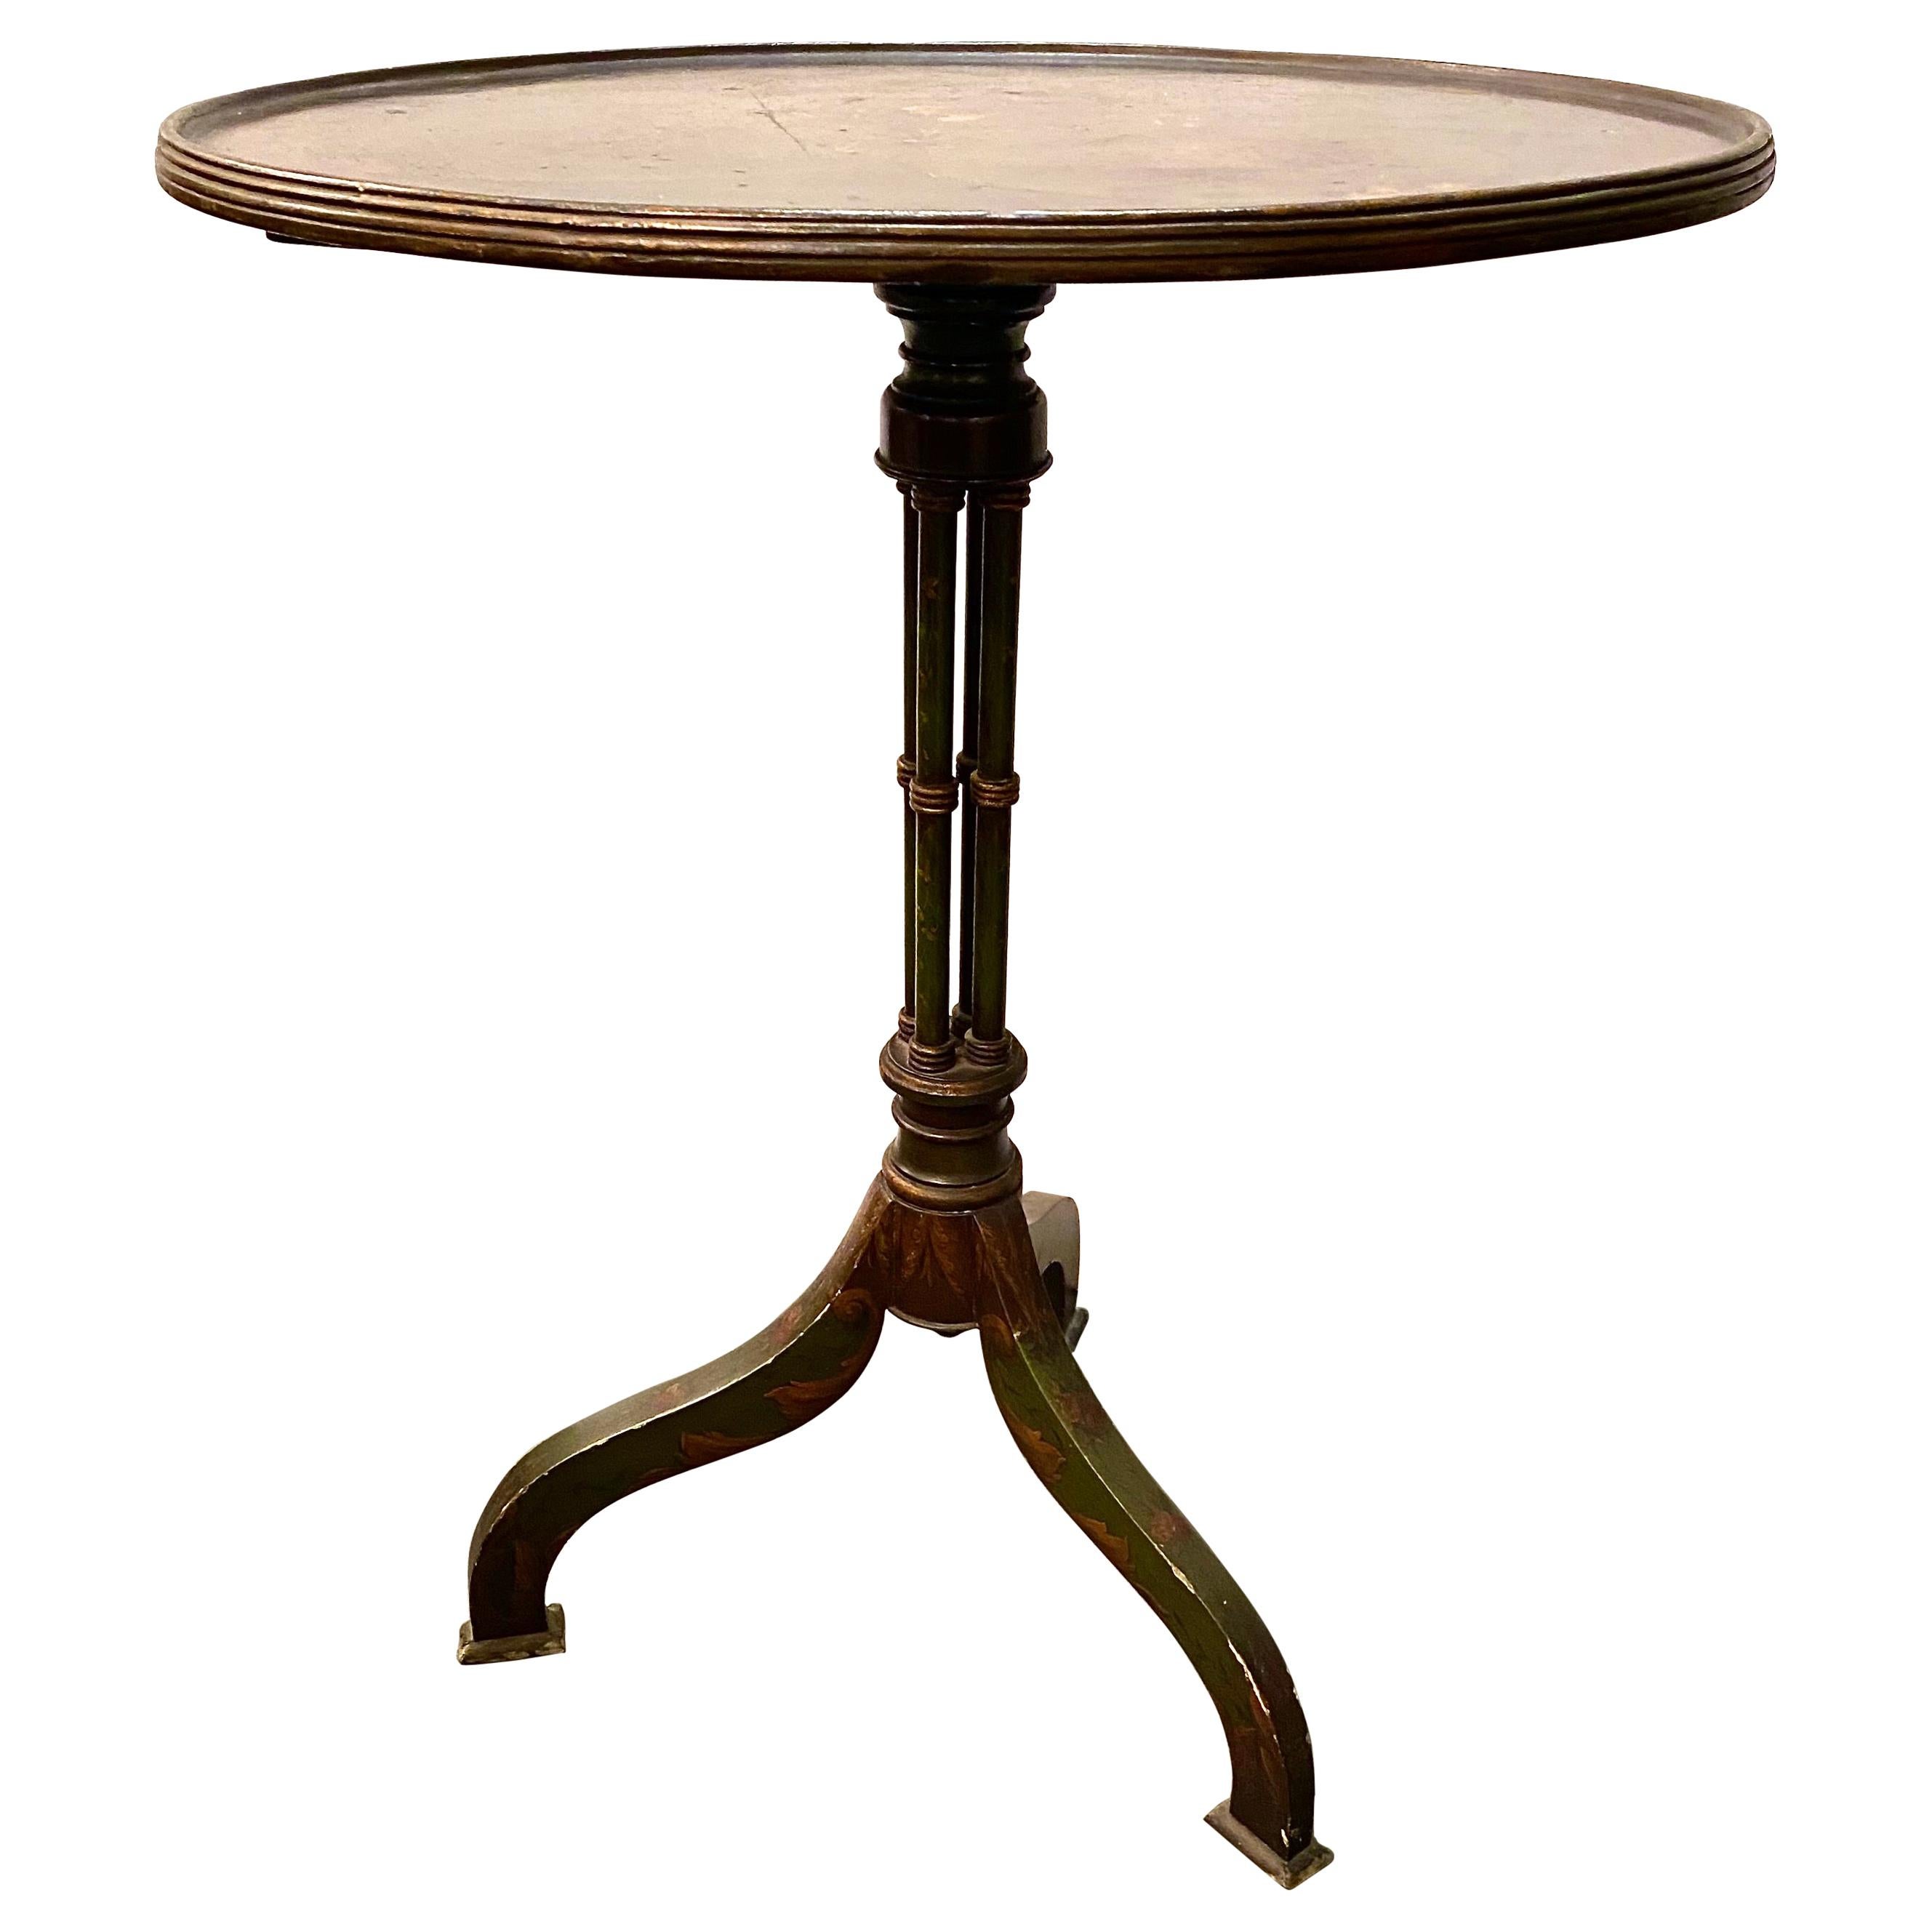 Angelica Kauffman-Style Occasional Table, 19th Century